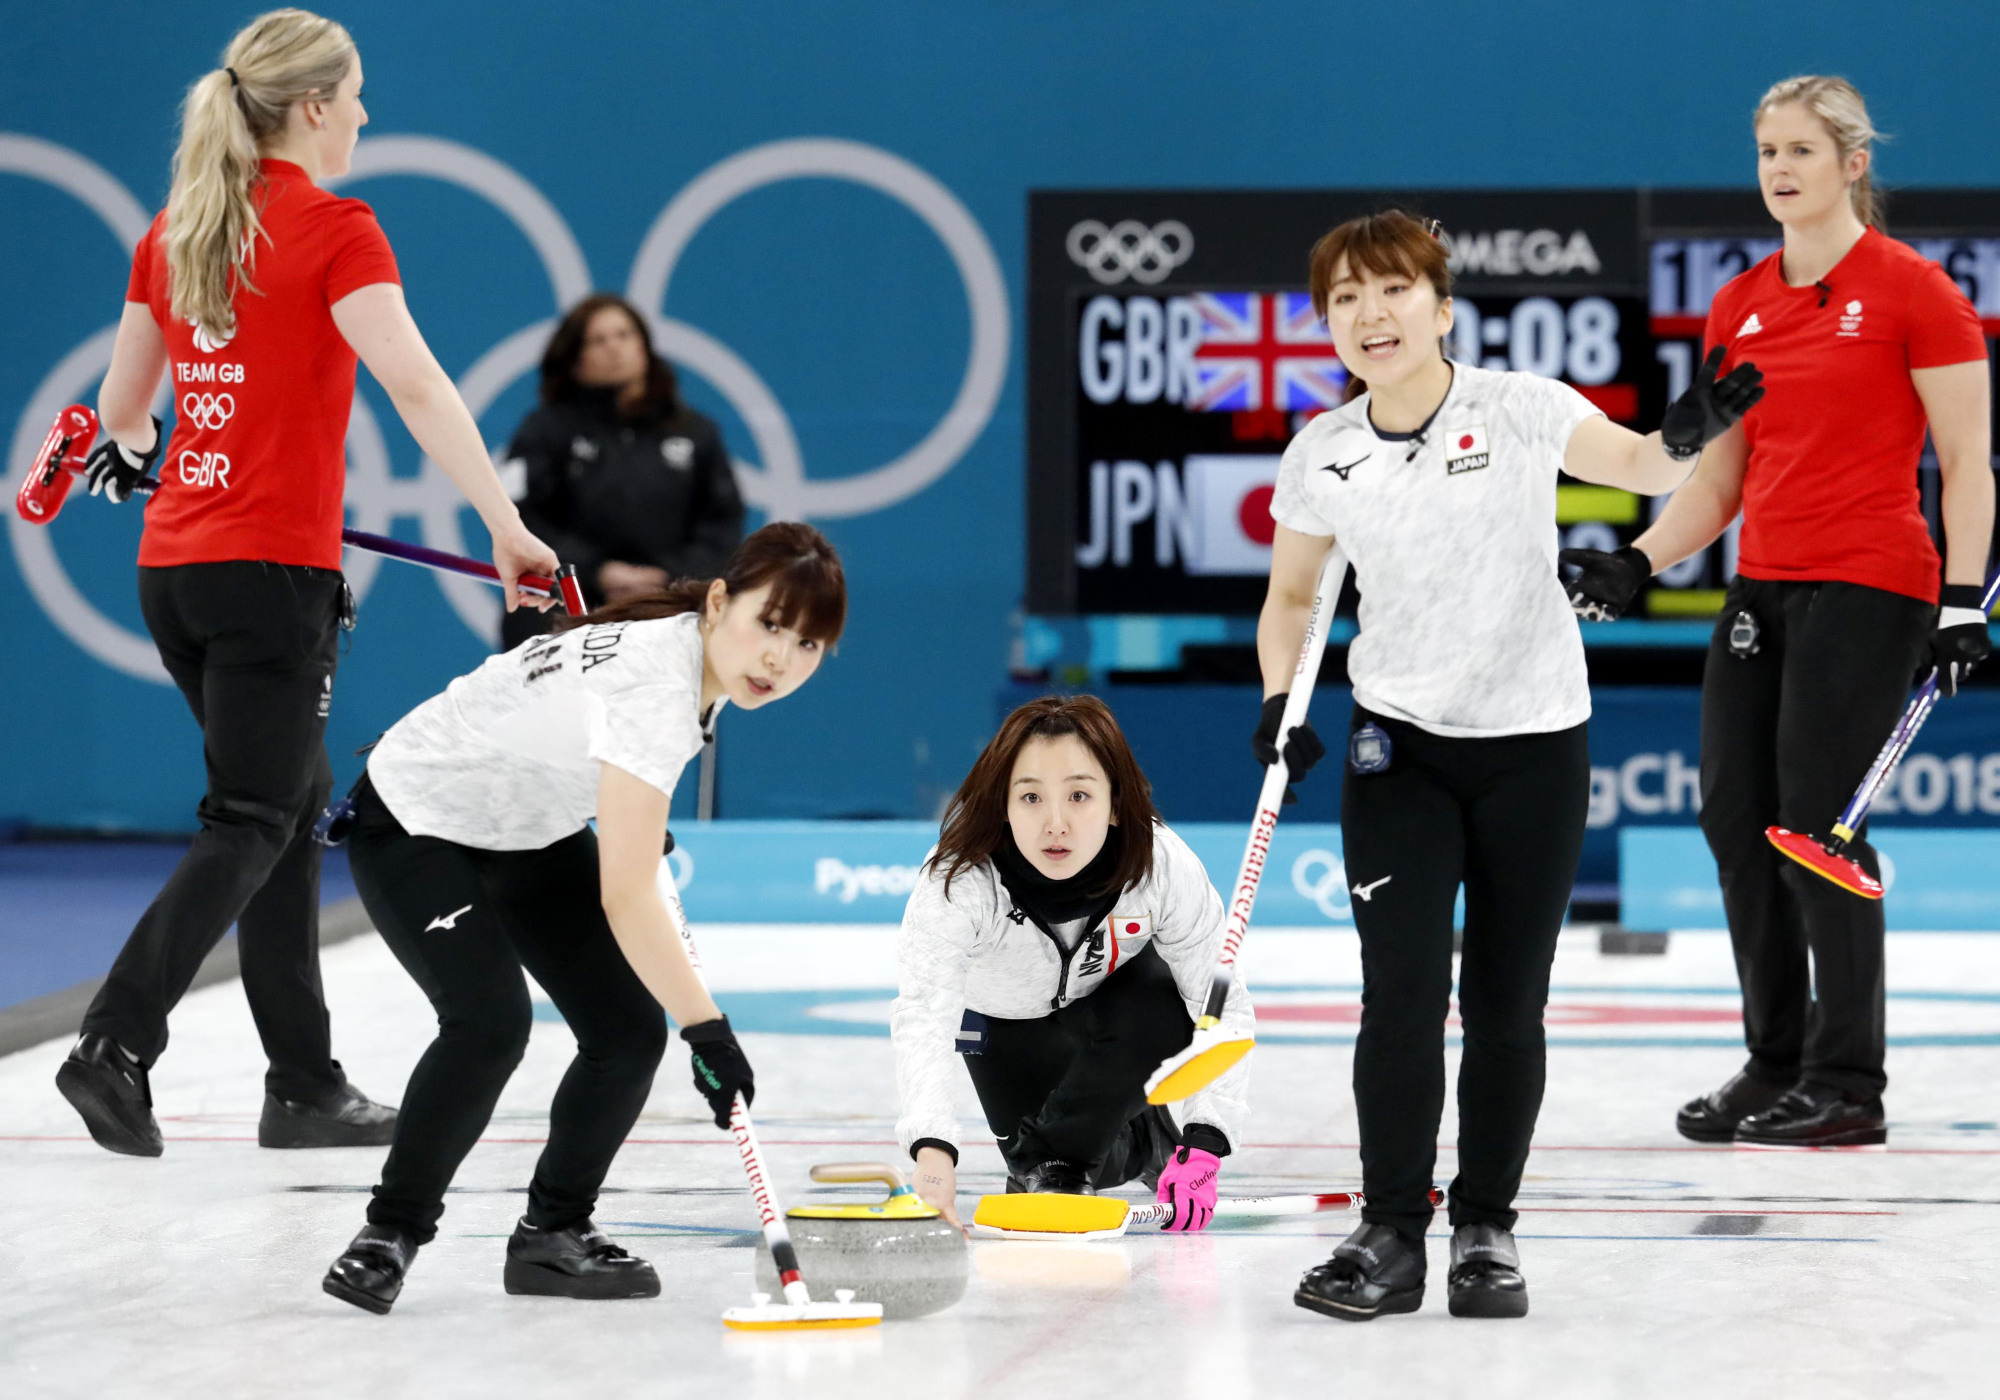 The Japanese women's curling team plays against Great Britain in the Pyeongchang Olympics in Gangneung, South Korea, where they won the bronze medal. | KYODO